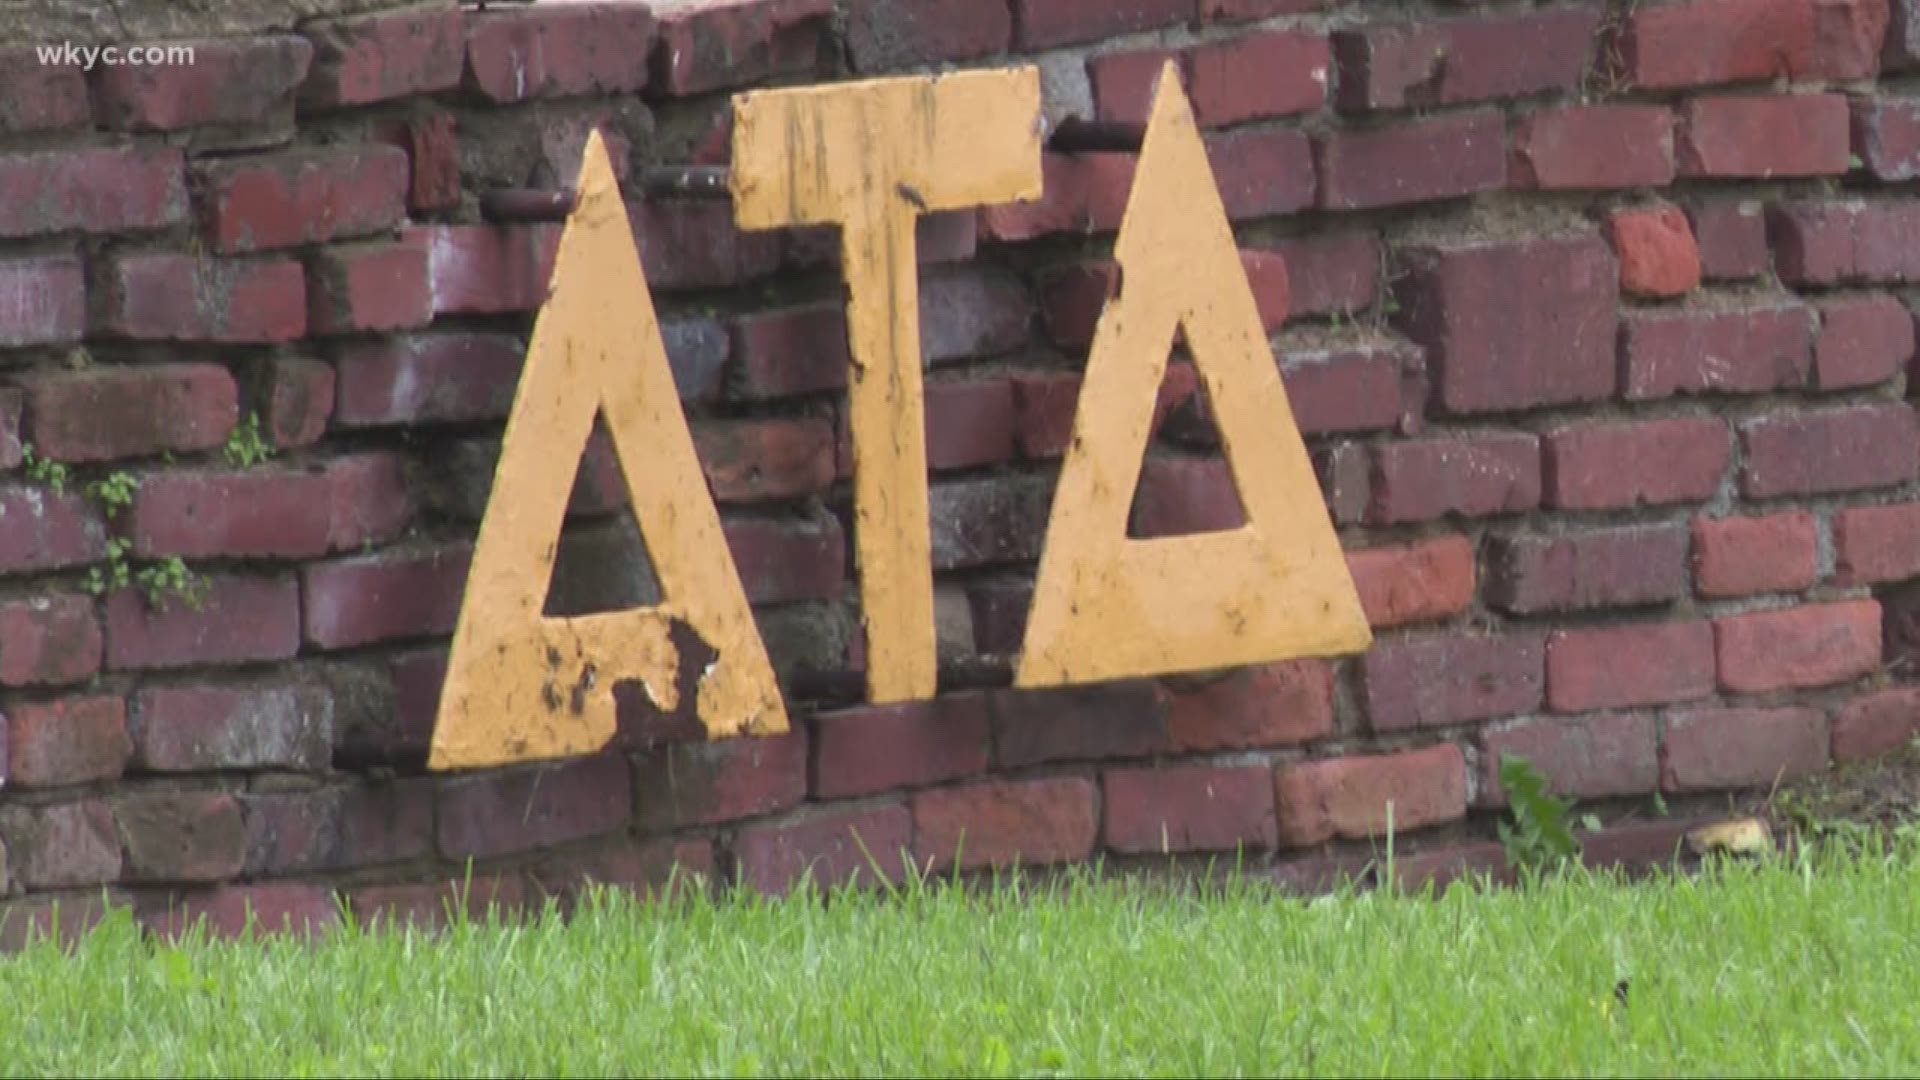 Kent State's Delta Tau Delta fraternity chapter suspended amid investigation